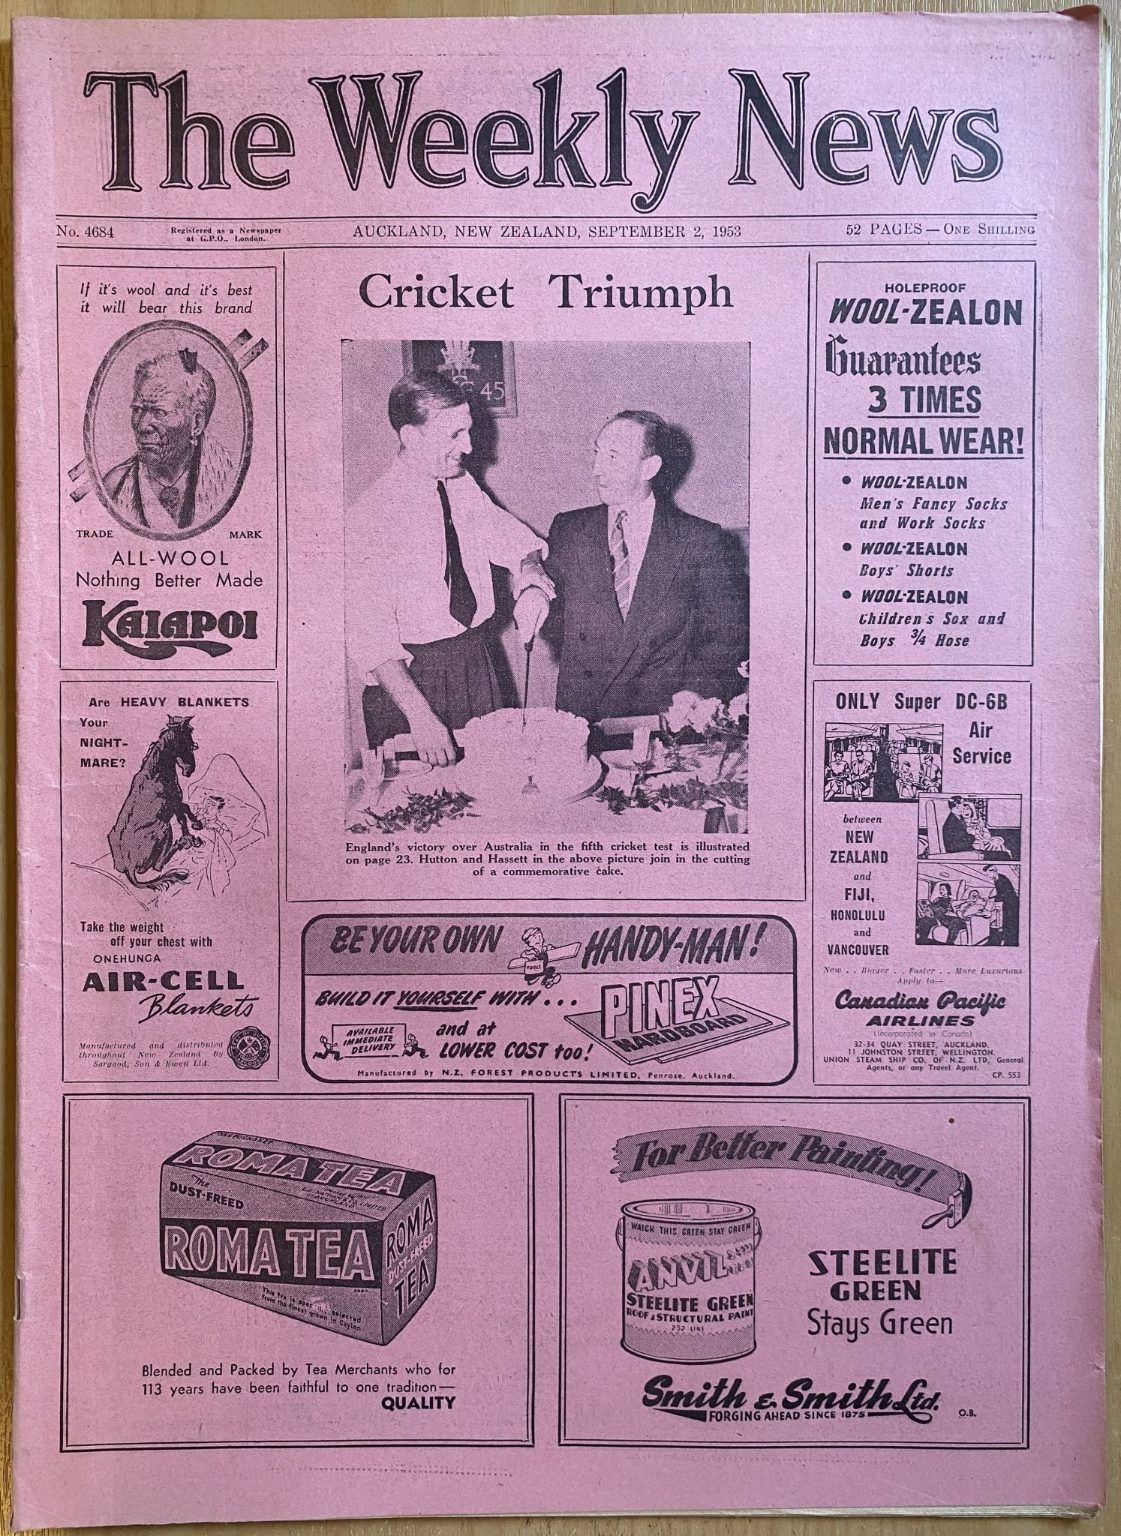 OLD NEWSPAPER: The Weekly News - No. 4684, 2 September 1953